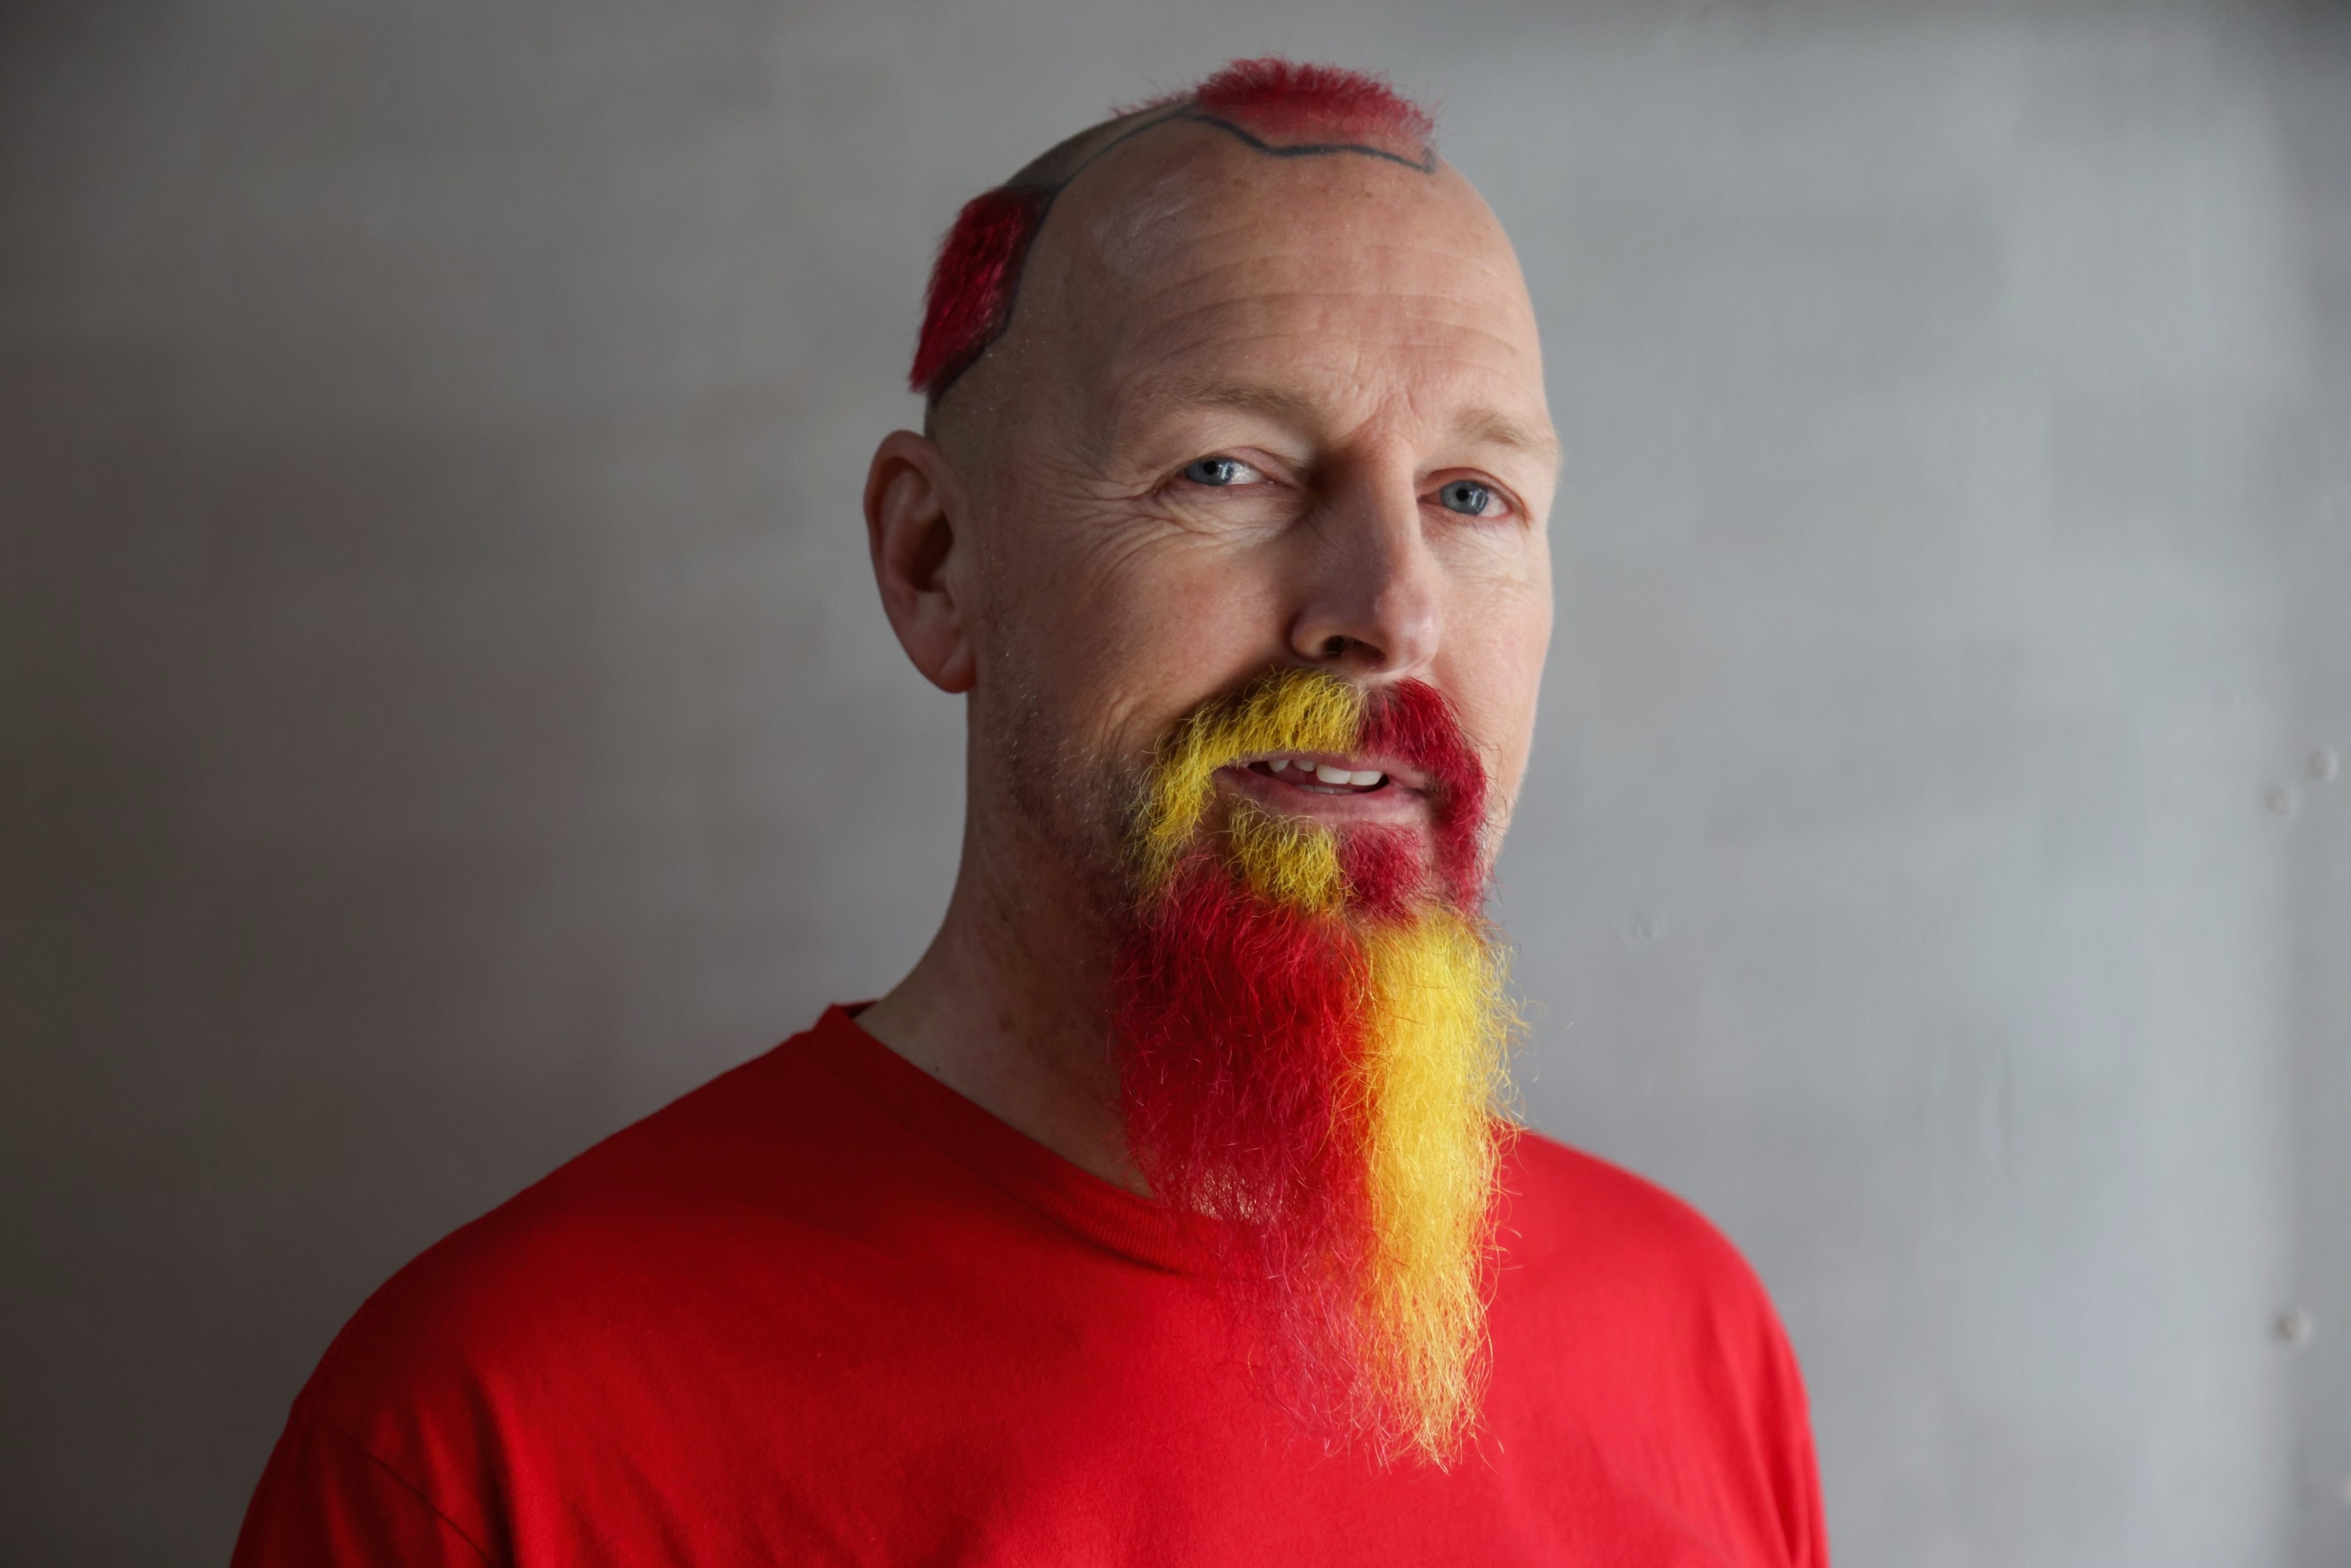 Man wearing red shirt with yellow and red dyed facial hair